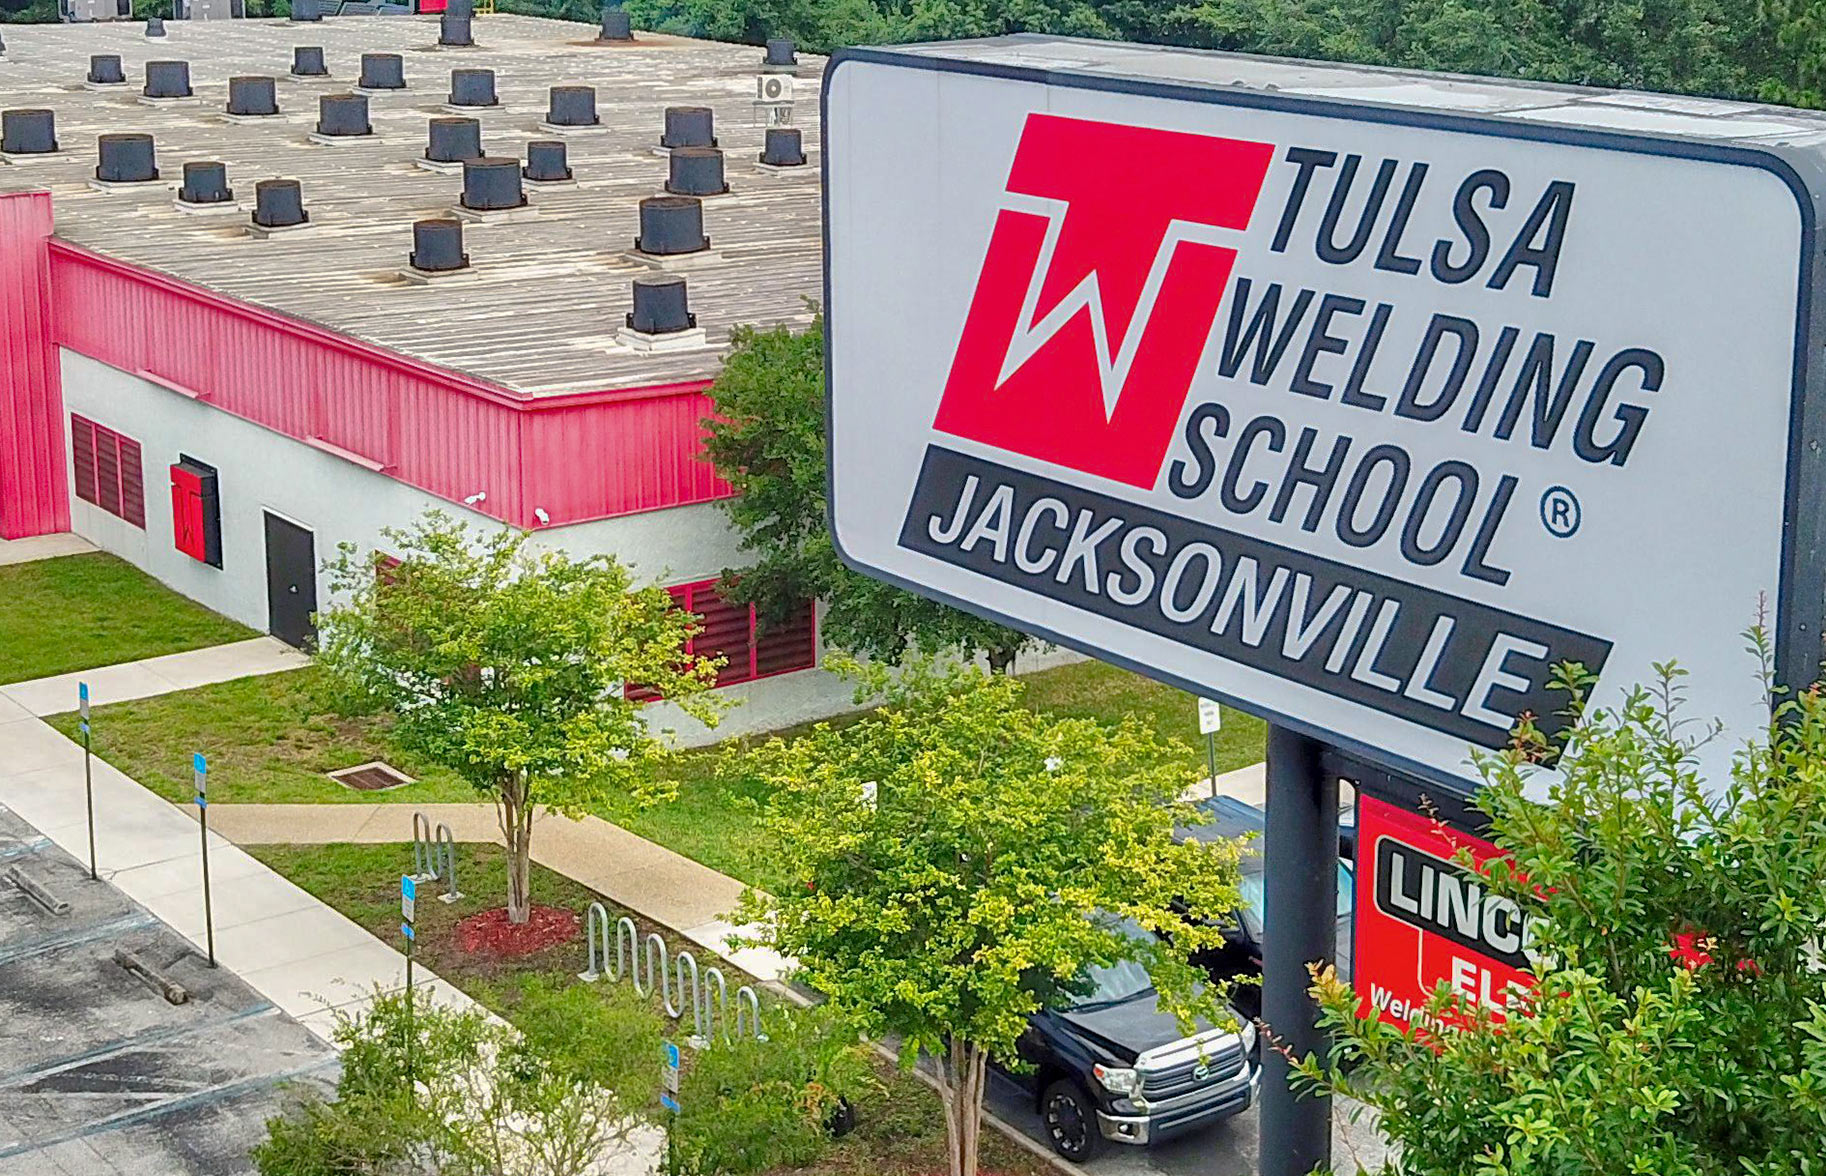 Aerial shot of TWS Jacksonville campus building and sign in Jacksonville, FL